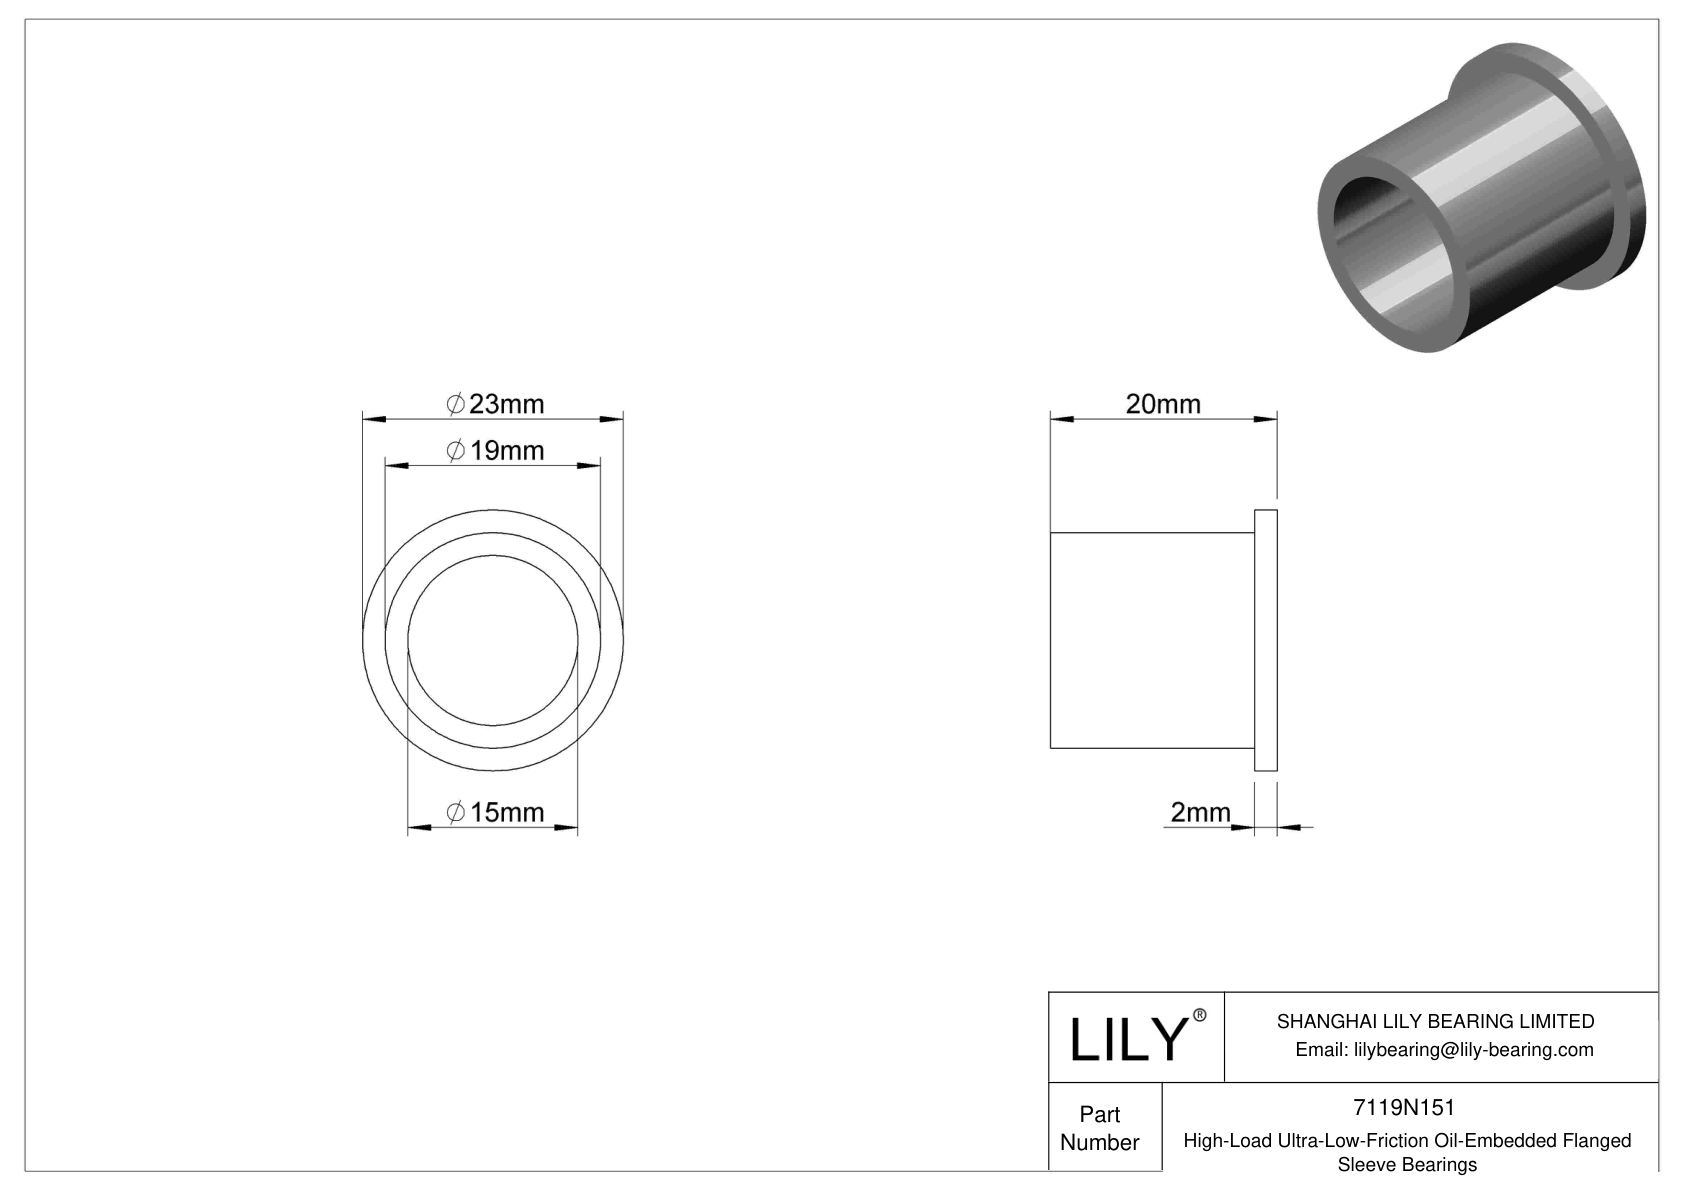 HBBJNBFB High-Load Ultra-Low-Friction Oil-Embedded Flanged Sleeve Bearings cad drawing